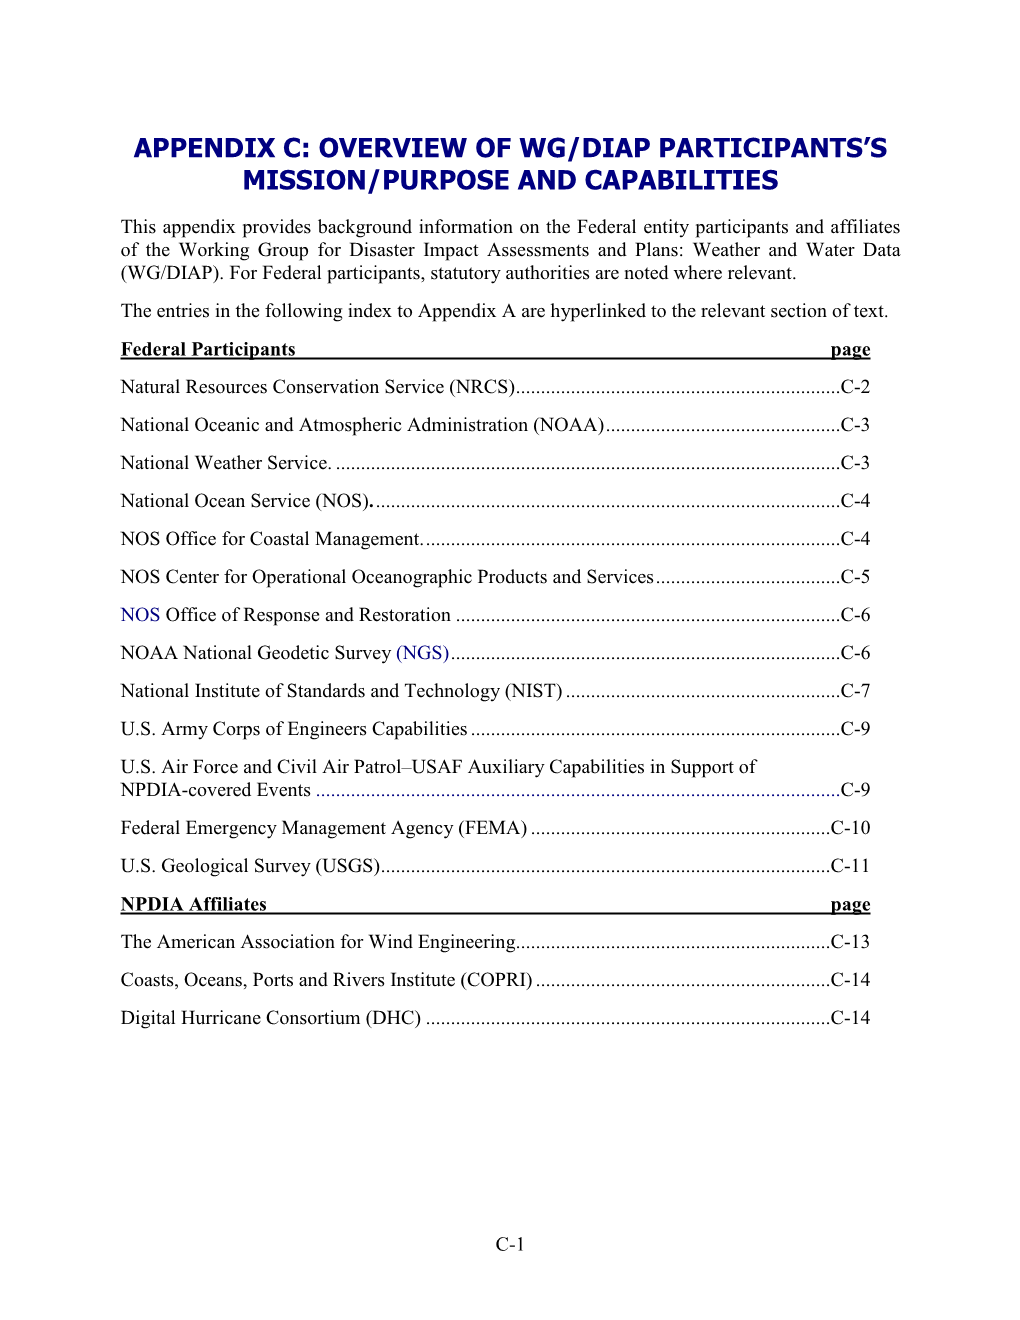 Appendix C: Overview of Wg/Diap Participants’S Mission/Purpose and Capabilities